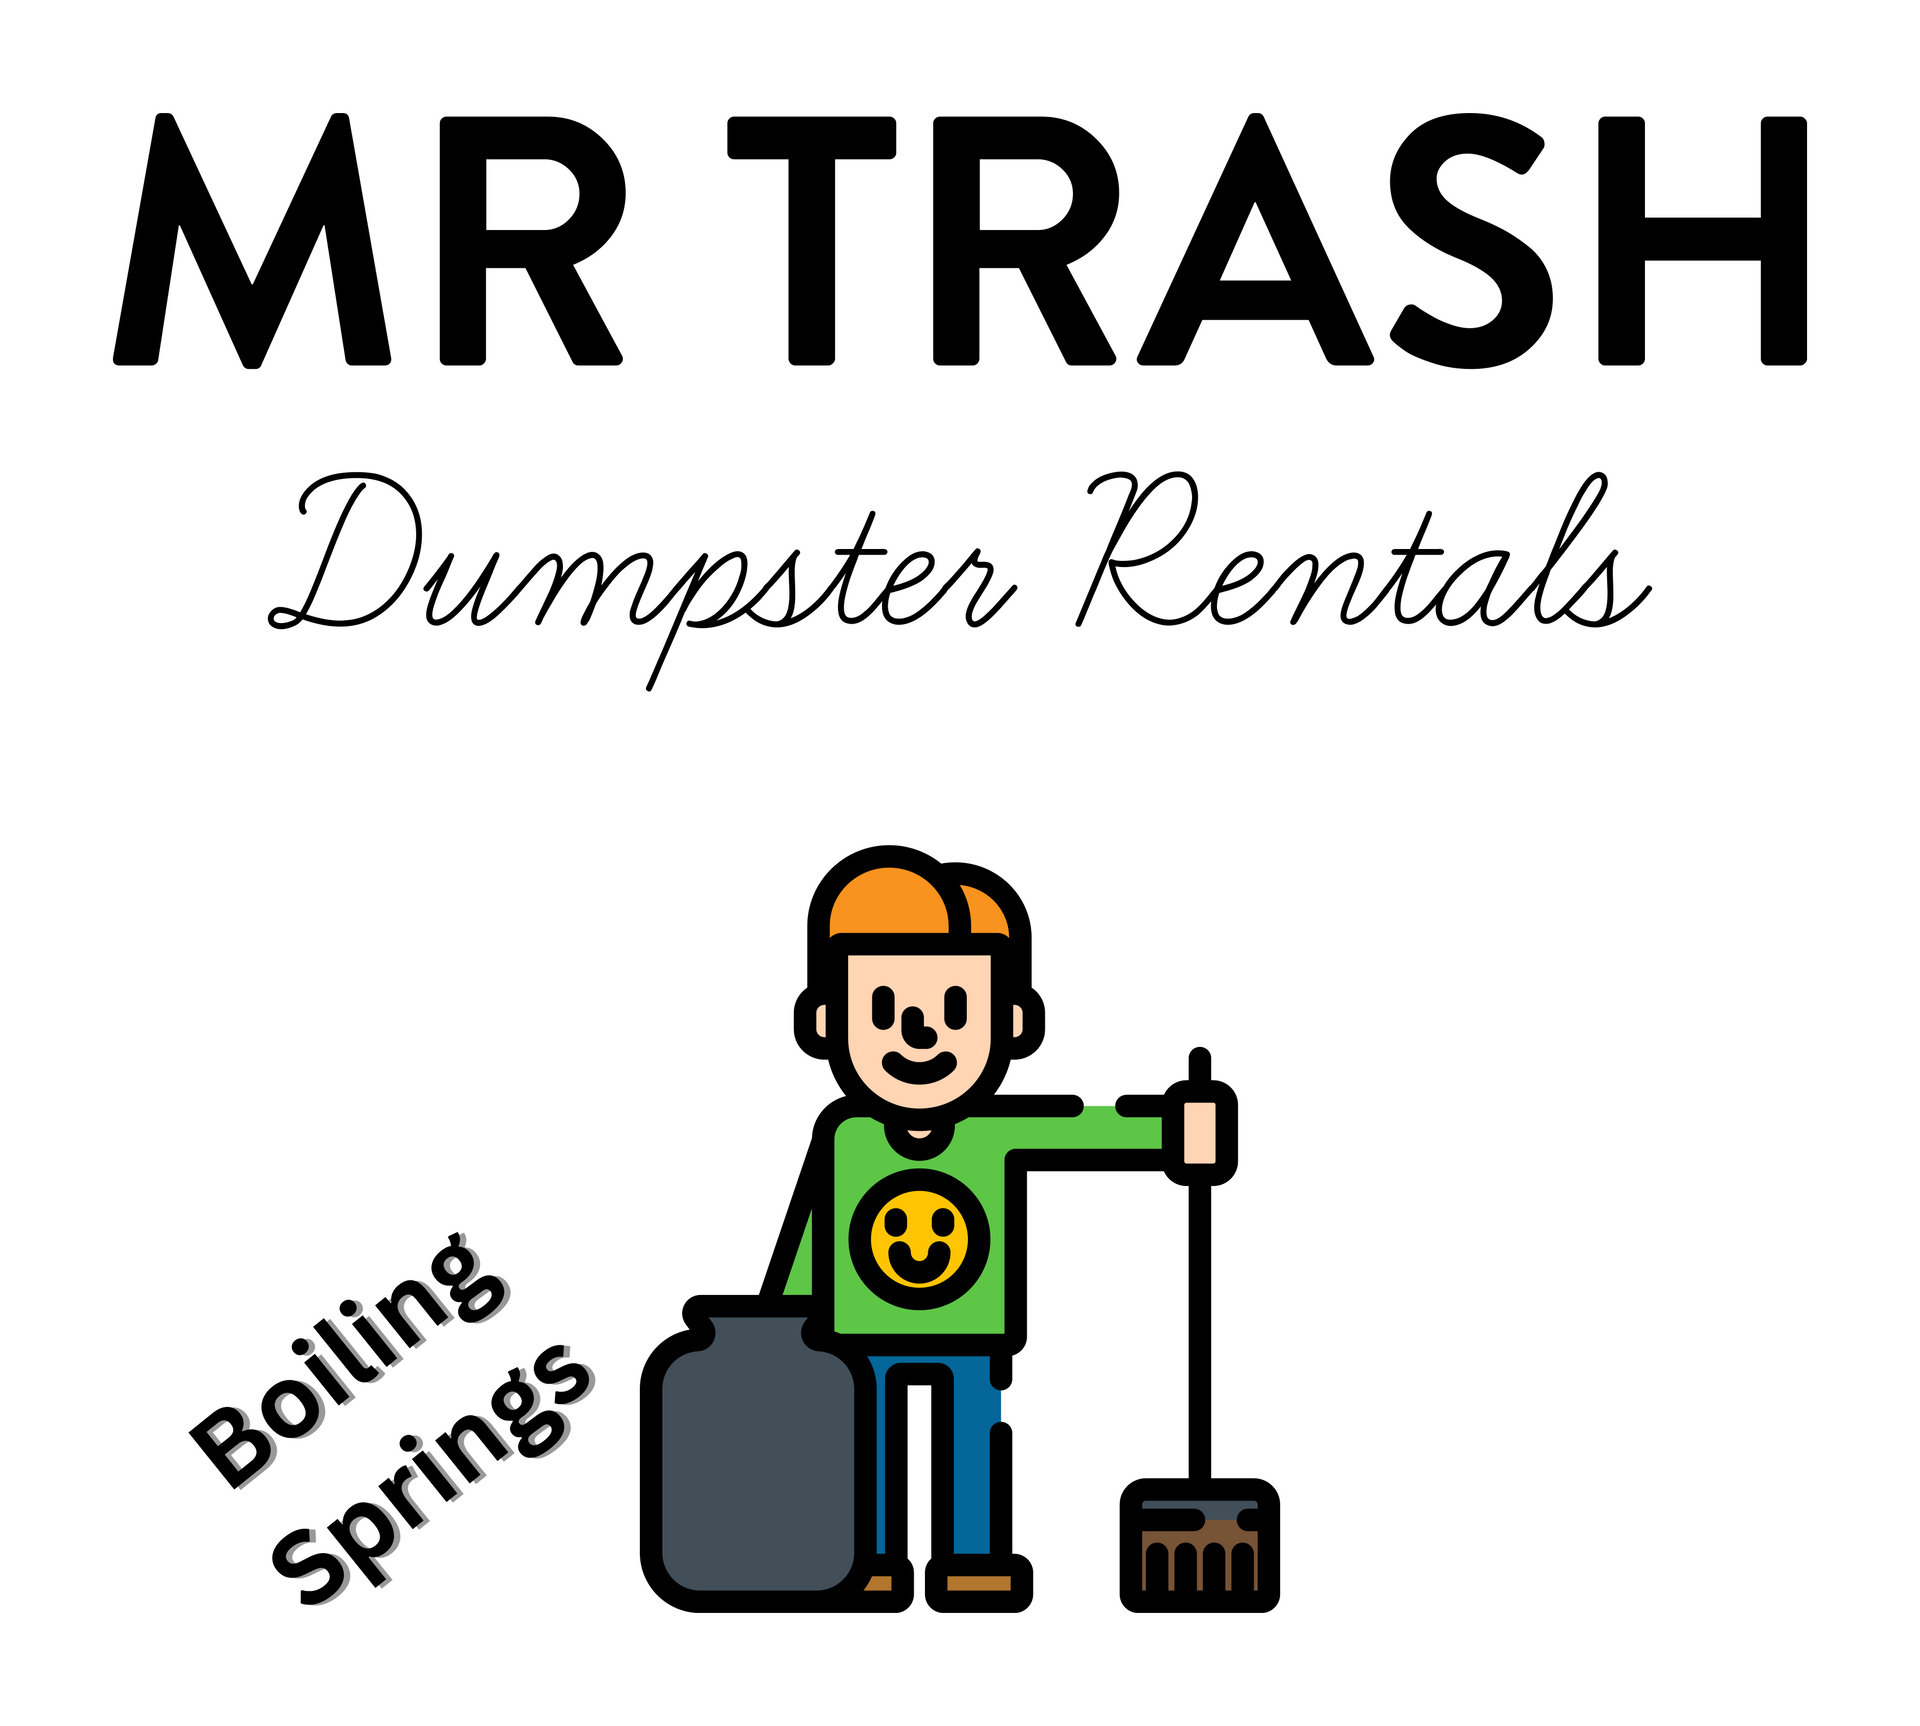 Mr. Trash Dumpster Rentals' logo: Representing our commitment to reliable and exceptional dumpster rentals in Spartanburg, SC, and beyond.